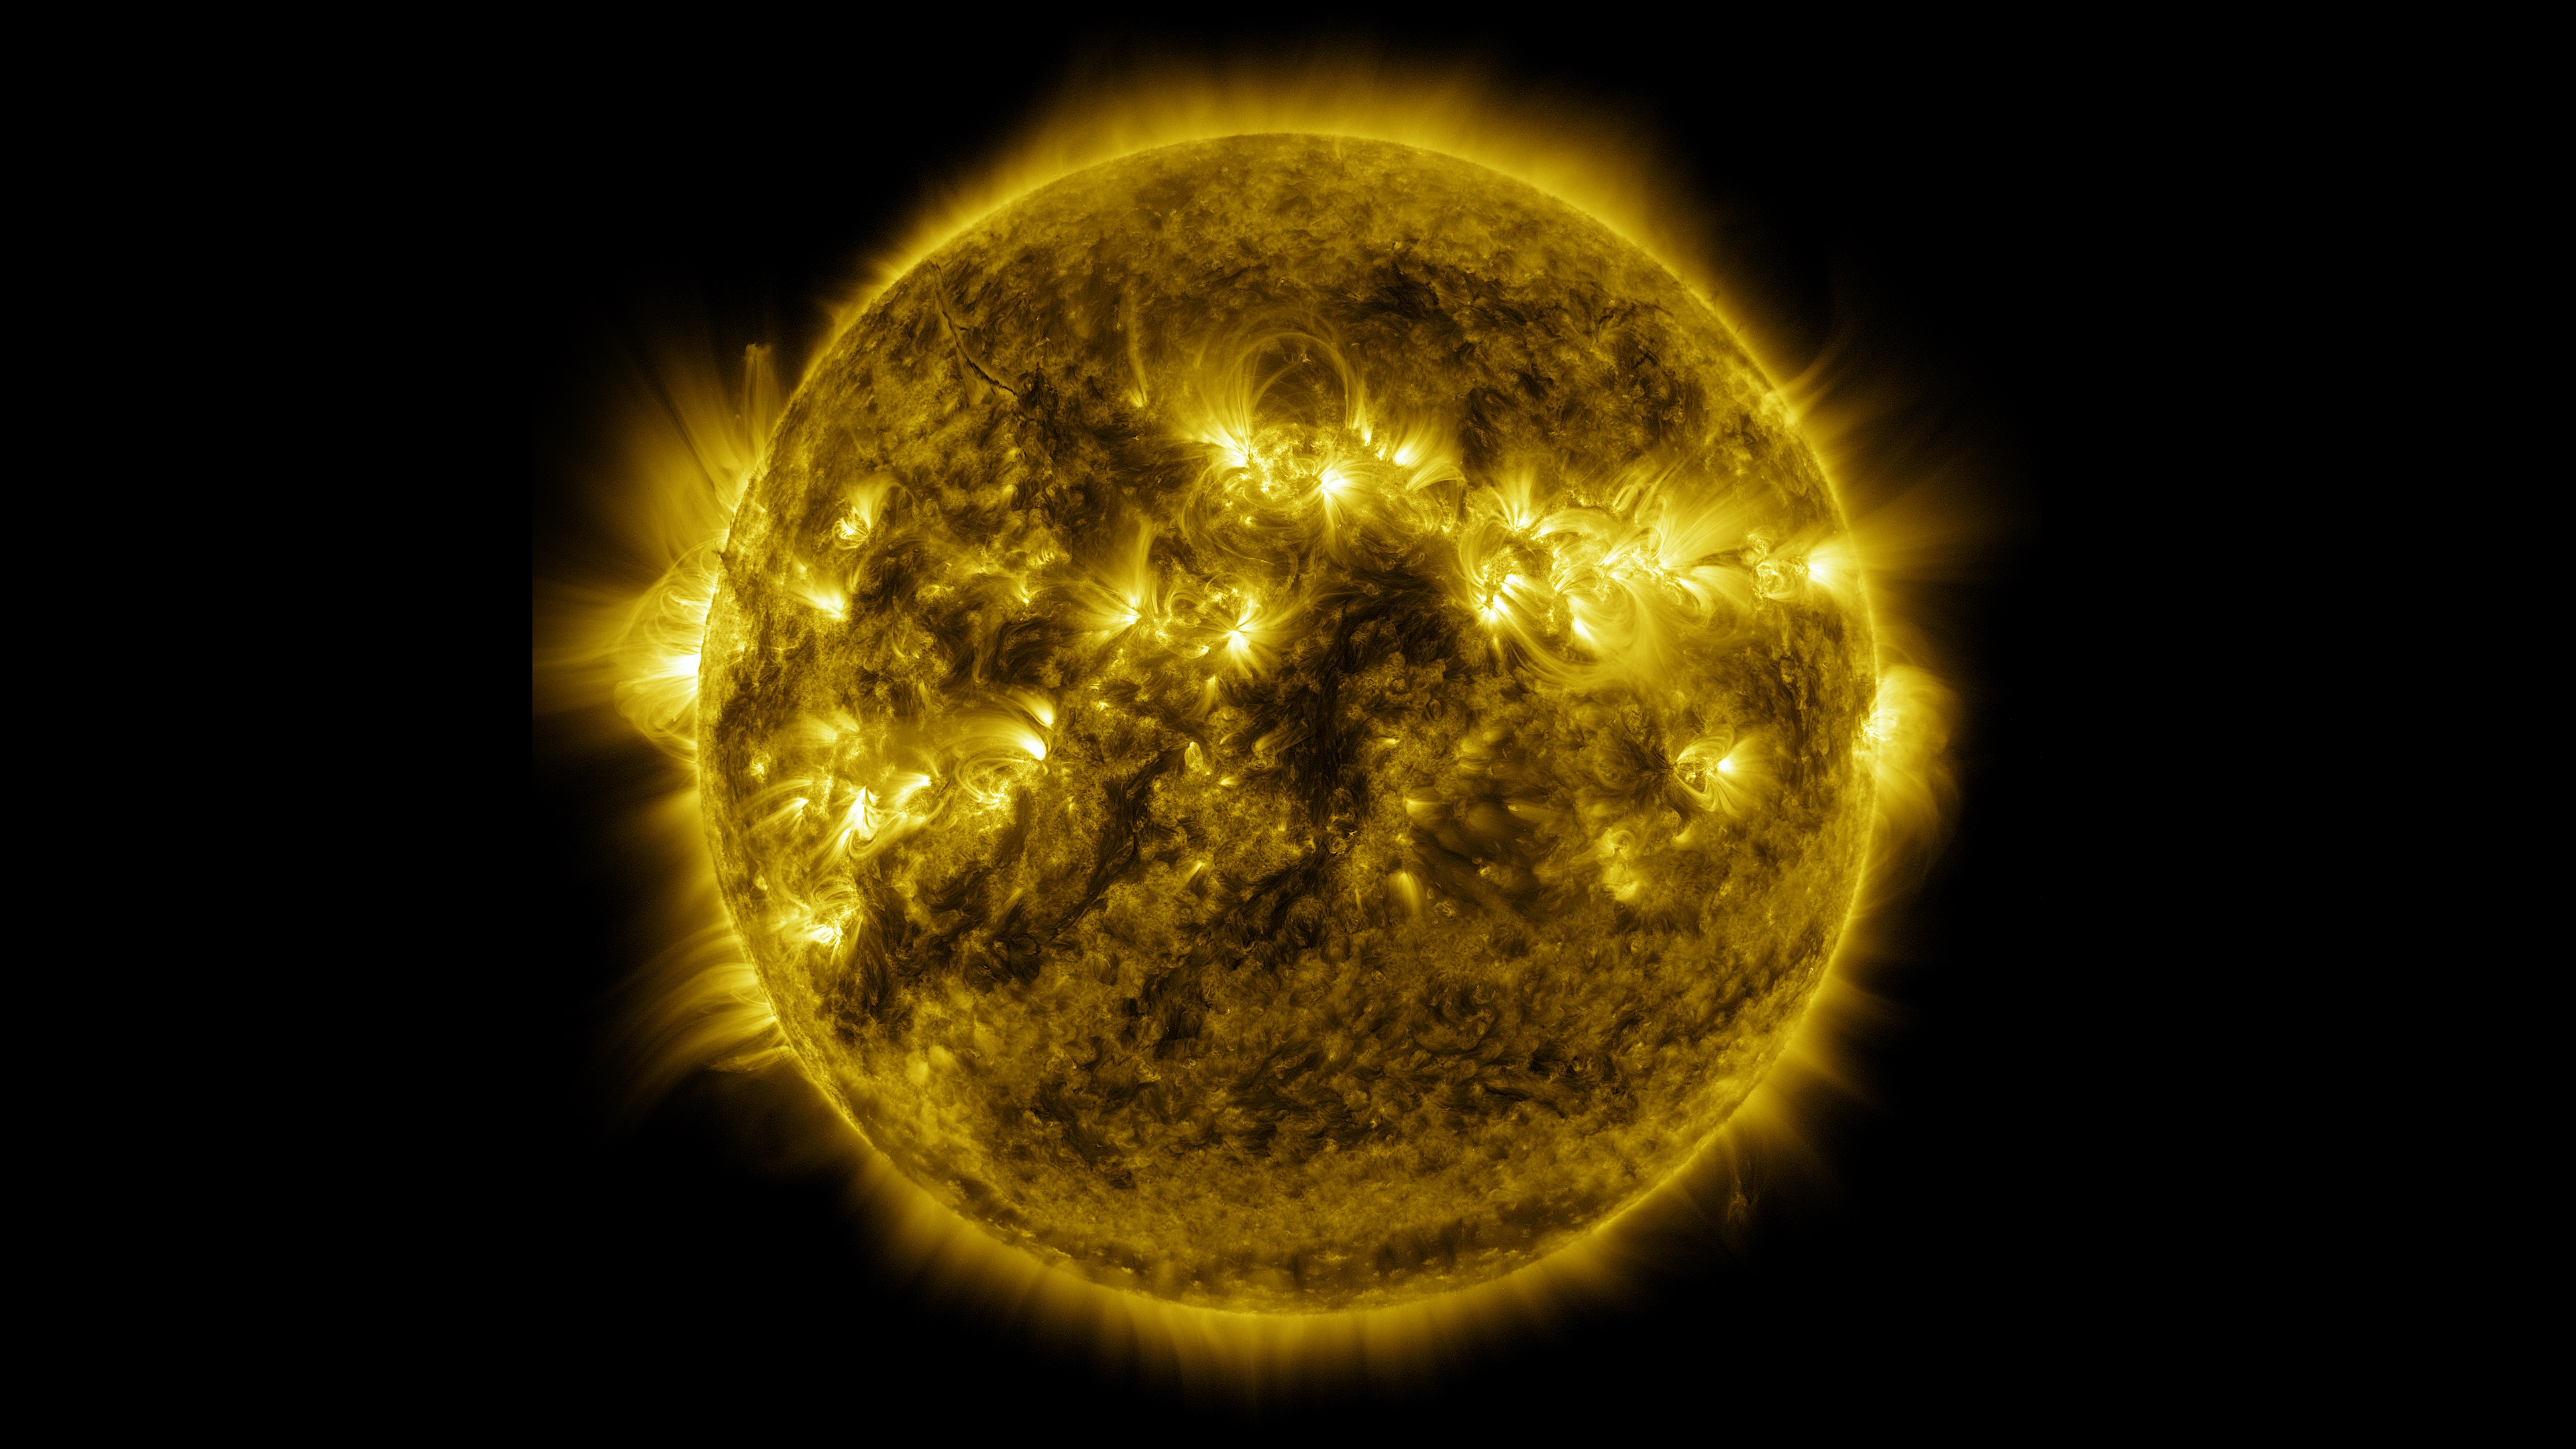 This ultra-high definition (3840x2160) video shows the sun in the 171 angstrom wavelength of extreme ultraviolet light. It covers a time period of January 2, 2015 to January 28, 2016 at a cadence of one frame every hour, or 24 frames per day.  The video is available to download here at 59.94 frames per second, double the rate YouTube currently allows for UHD content.Complete transcript available.